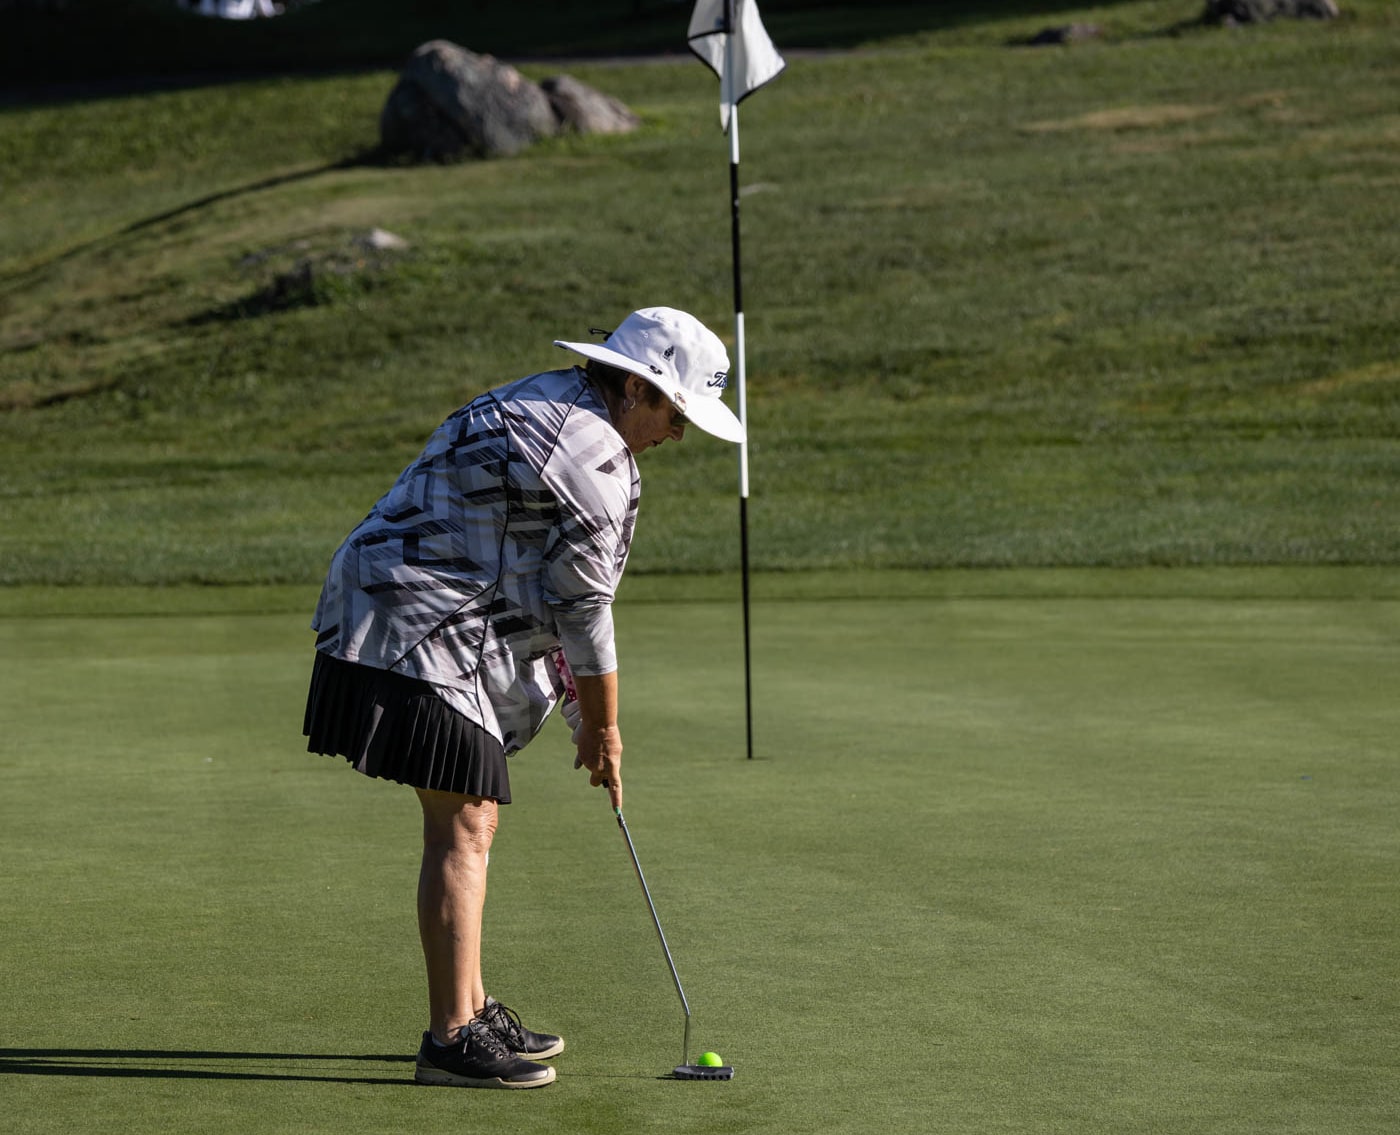 Country-Club-Of-New-Bedford FB-2023-Womens-FB-Gallery August-2023-Country-Club-Of-New-Bedford-FB-2023-Womens-FB-Gallery August-2023-Womens-FB-Gallery-Thursday-Photos-Image-8